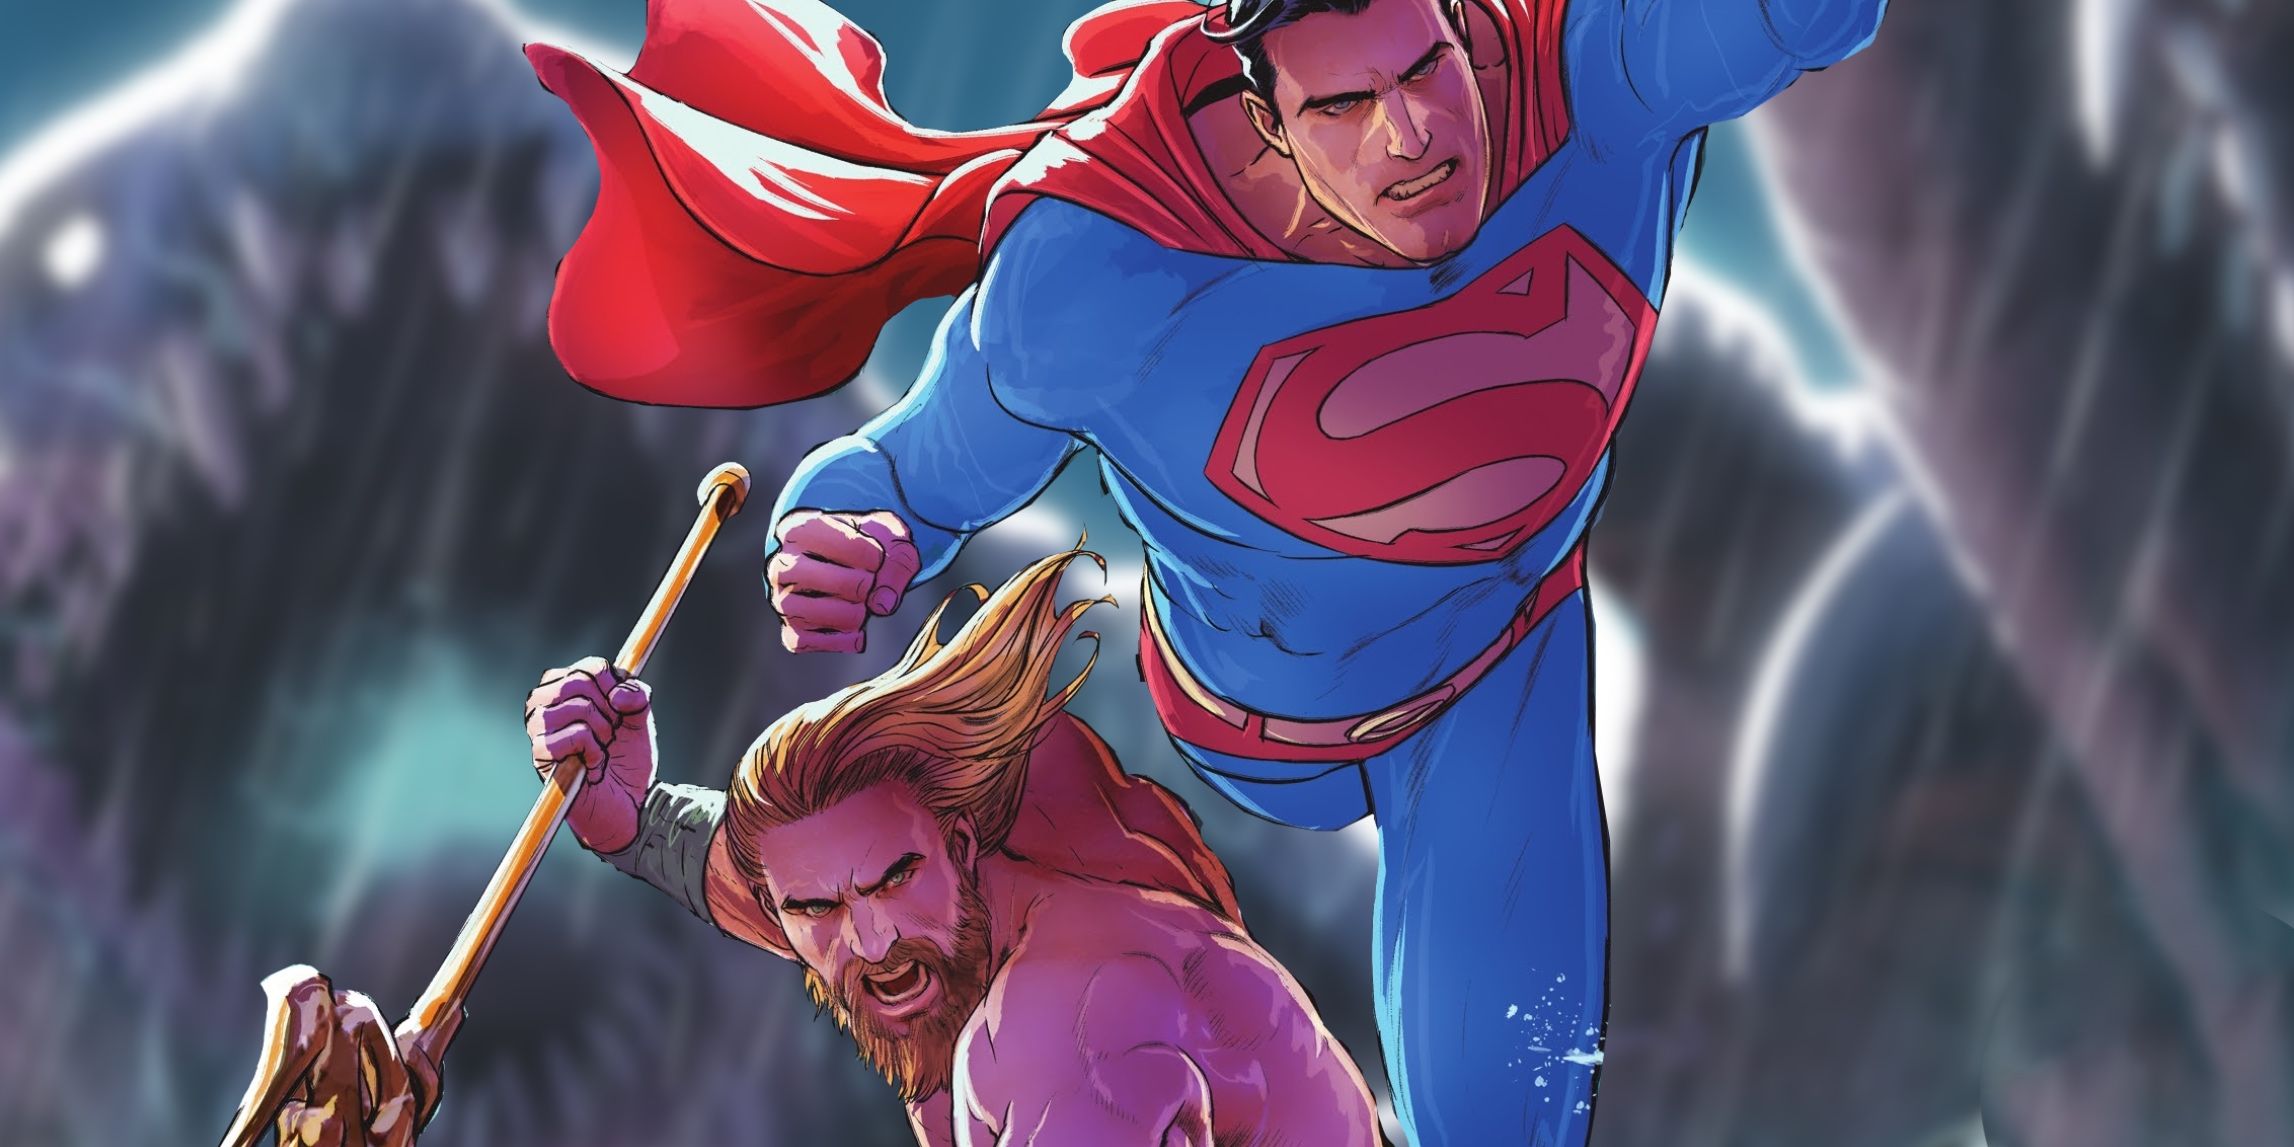 Superman and Aquaman fight together as a monster chases them